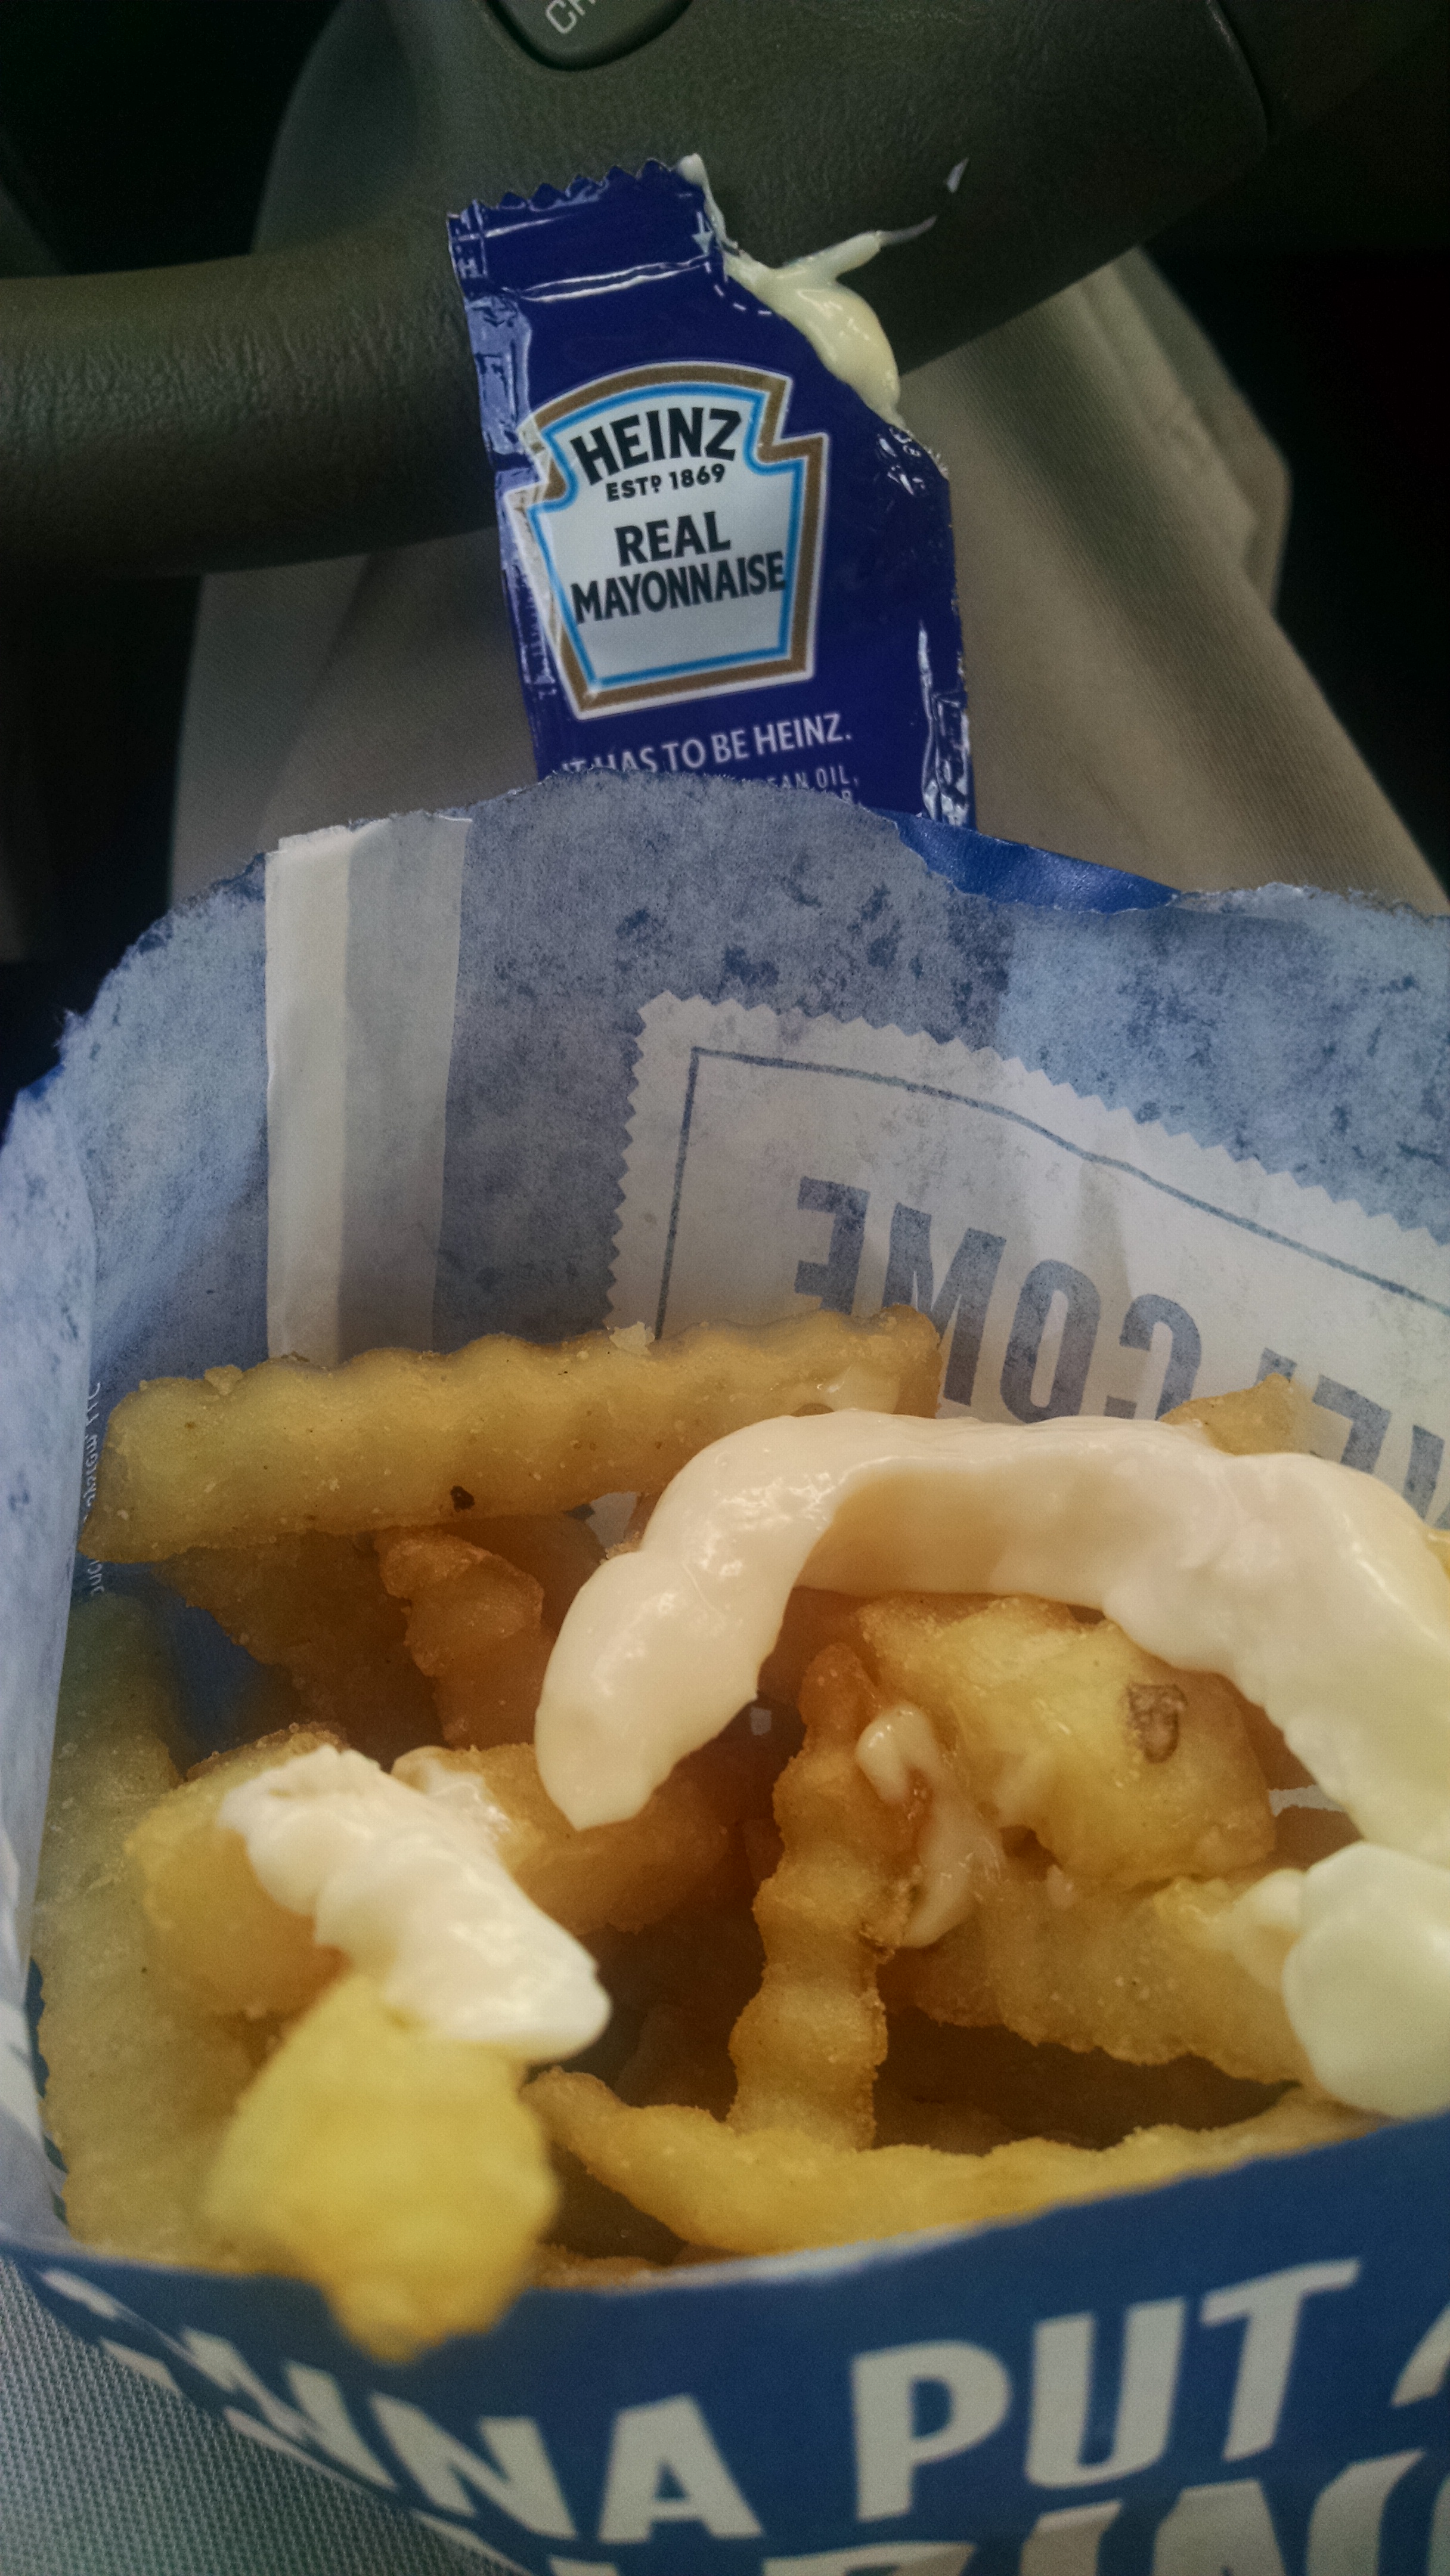 French fries from a fast-food restaurant with a stream of mayo.